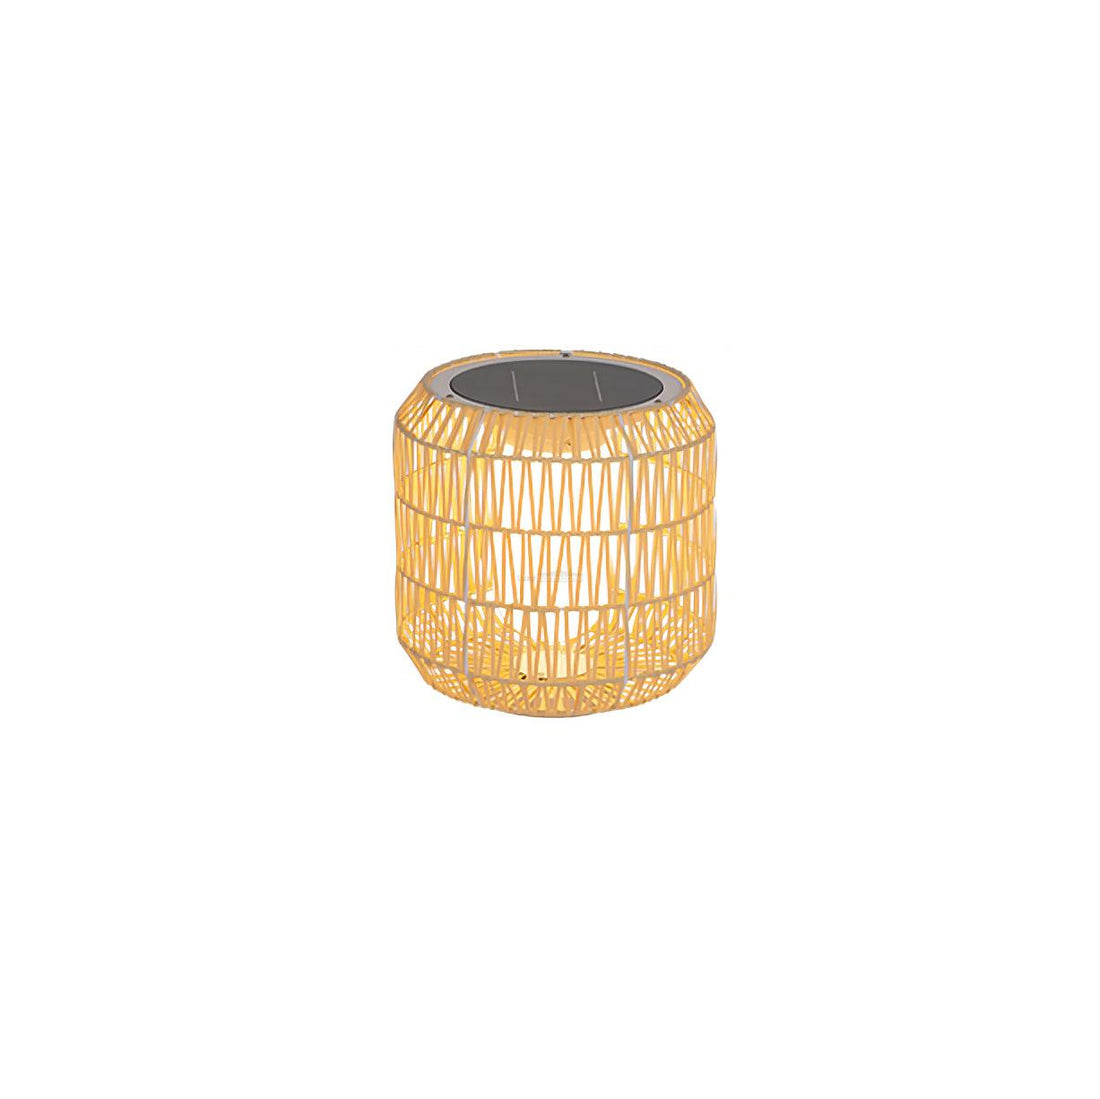 Woven Rattan Lamp for Outdoor